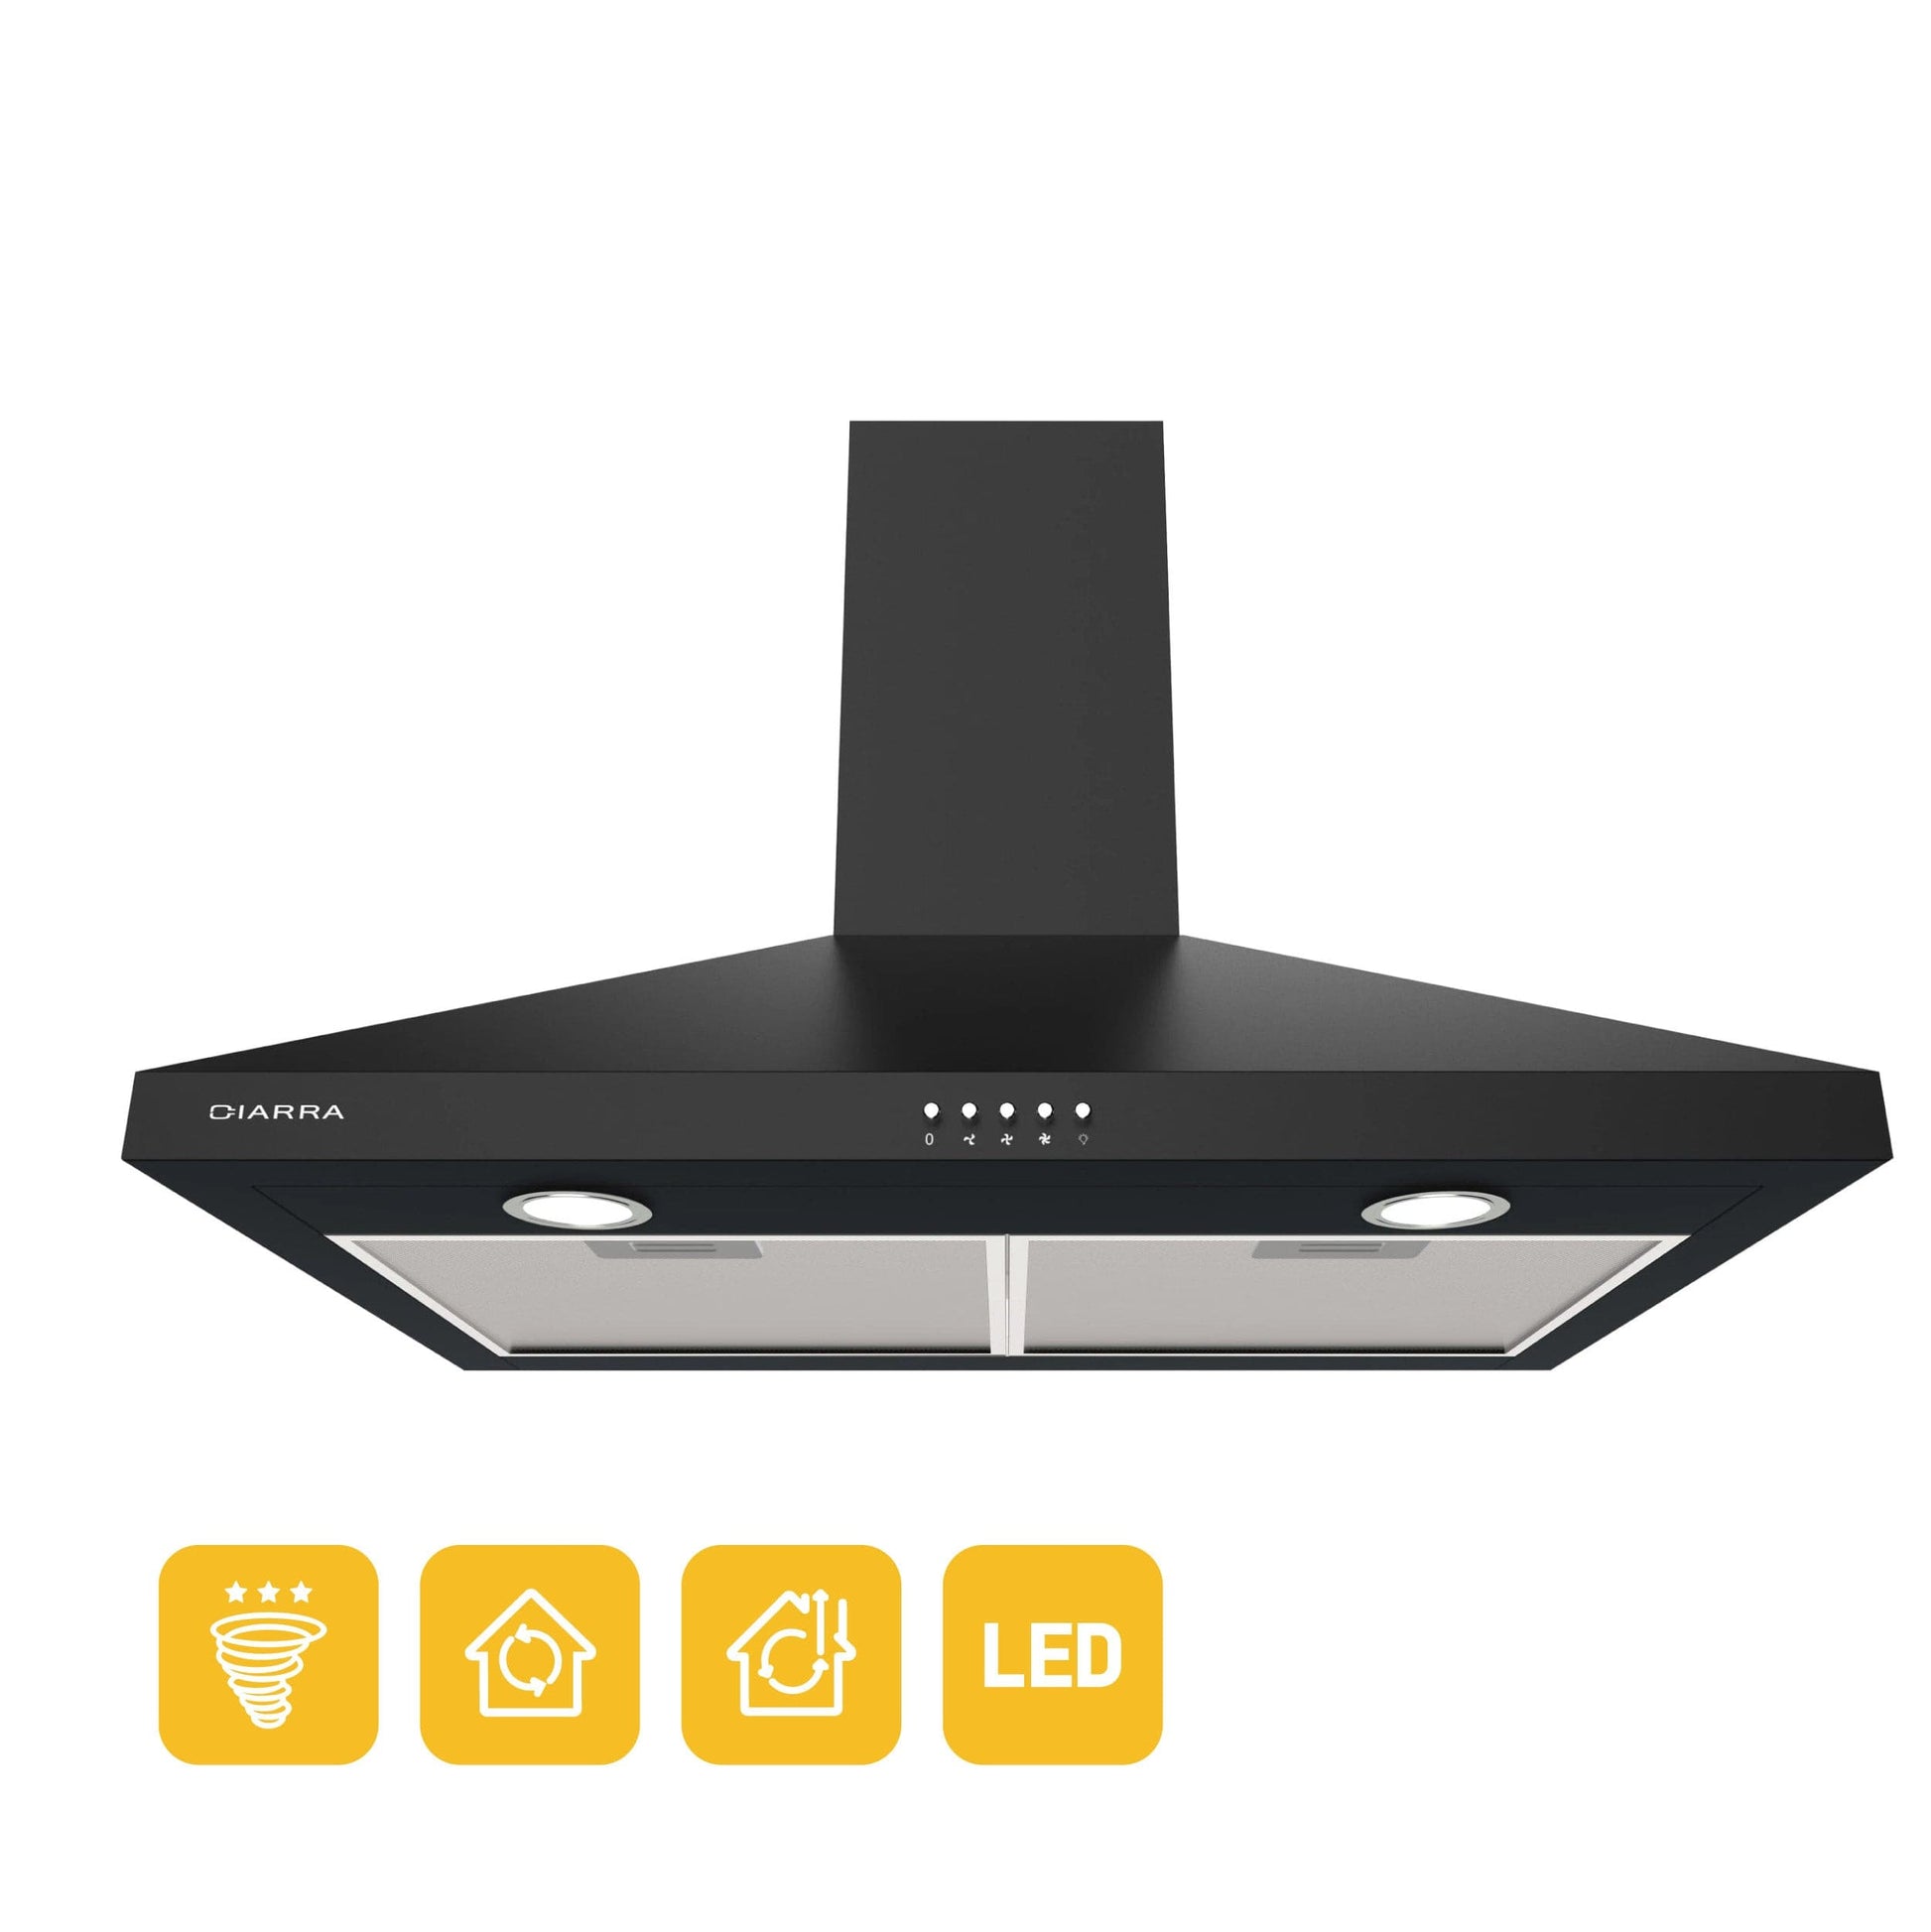 CIARRA 30 Inch Wall Mount Range Hood with 3-speed Extraction CAB75206P-OW - Almondscove